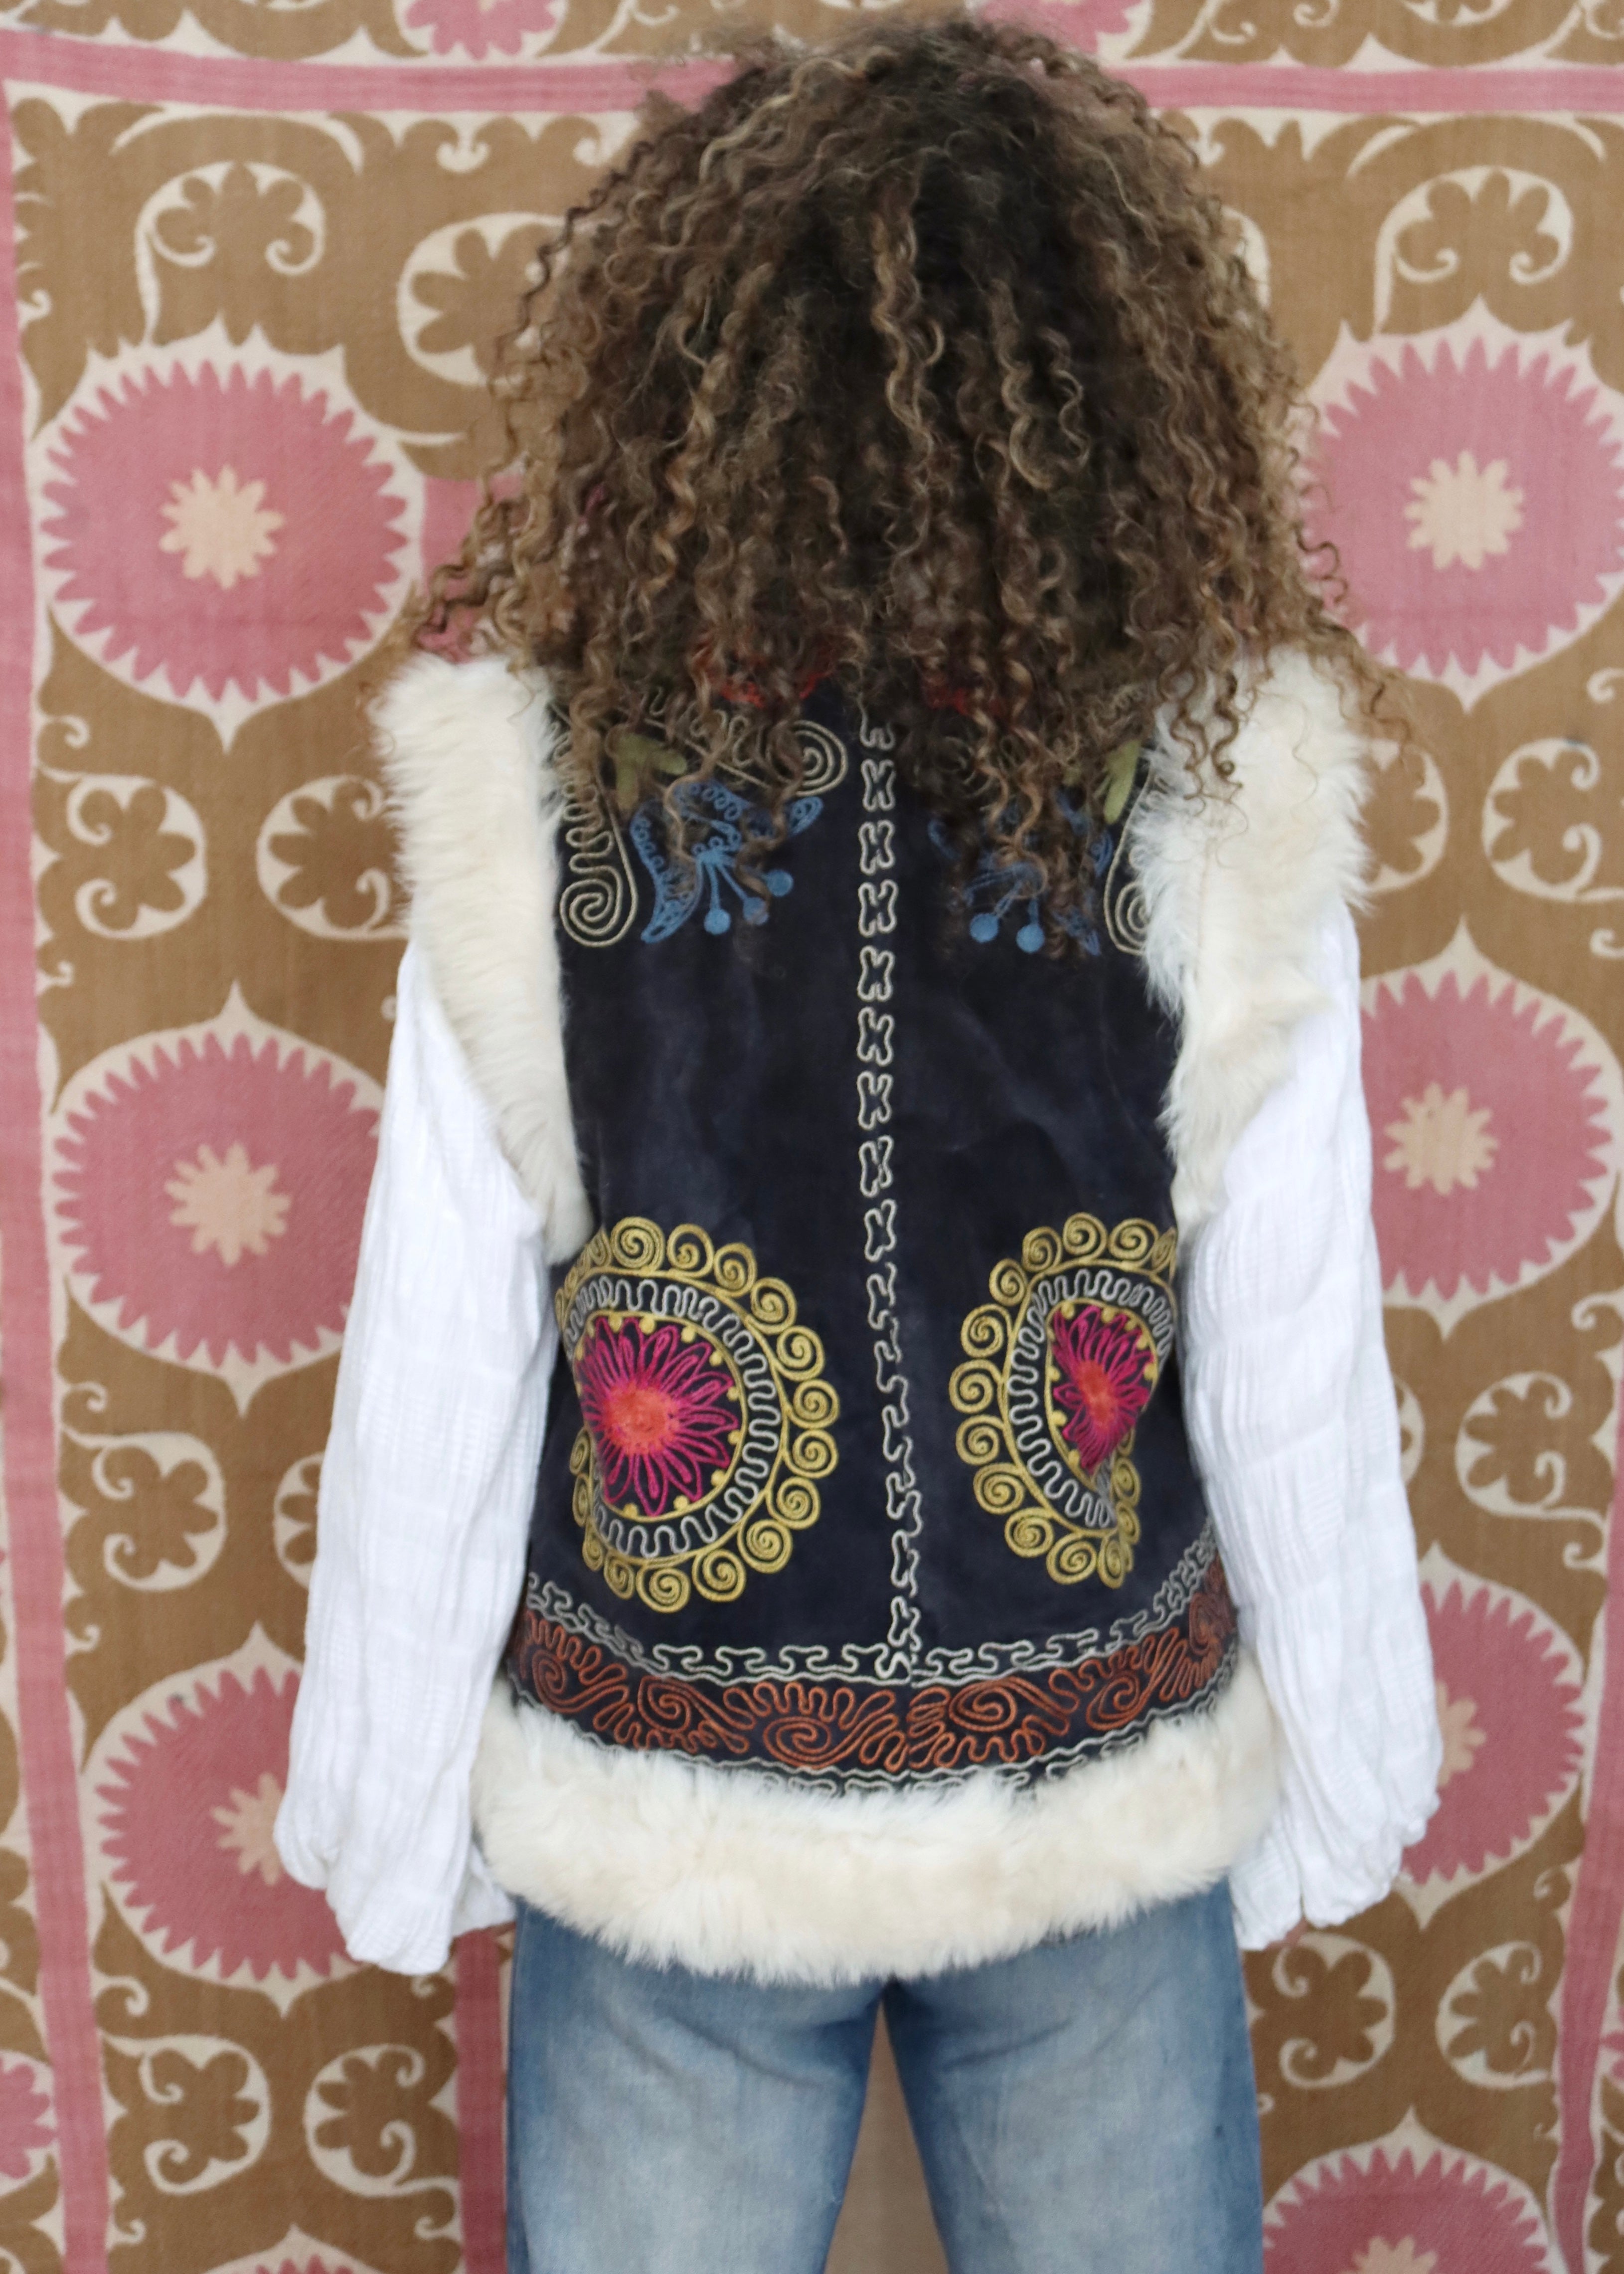 ethically handmade vintage 70's style fur vest